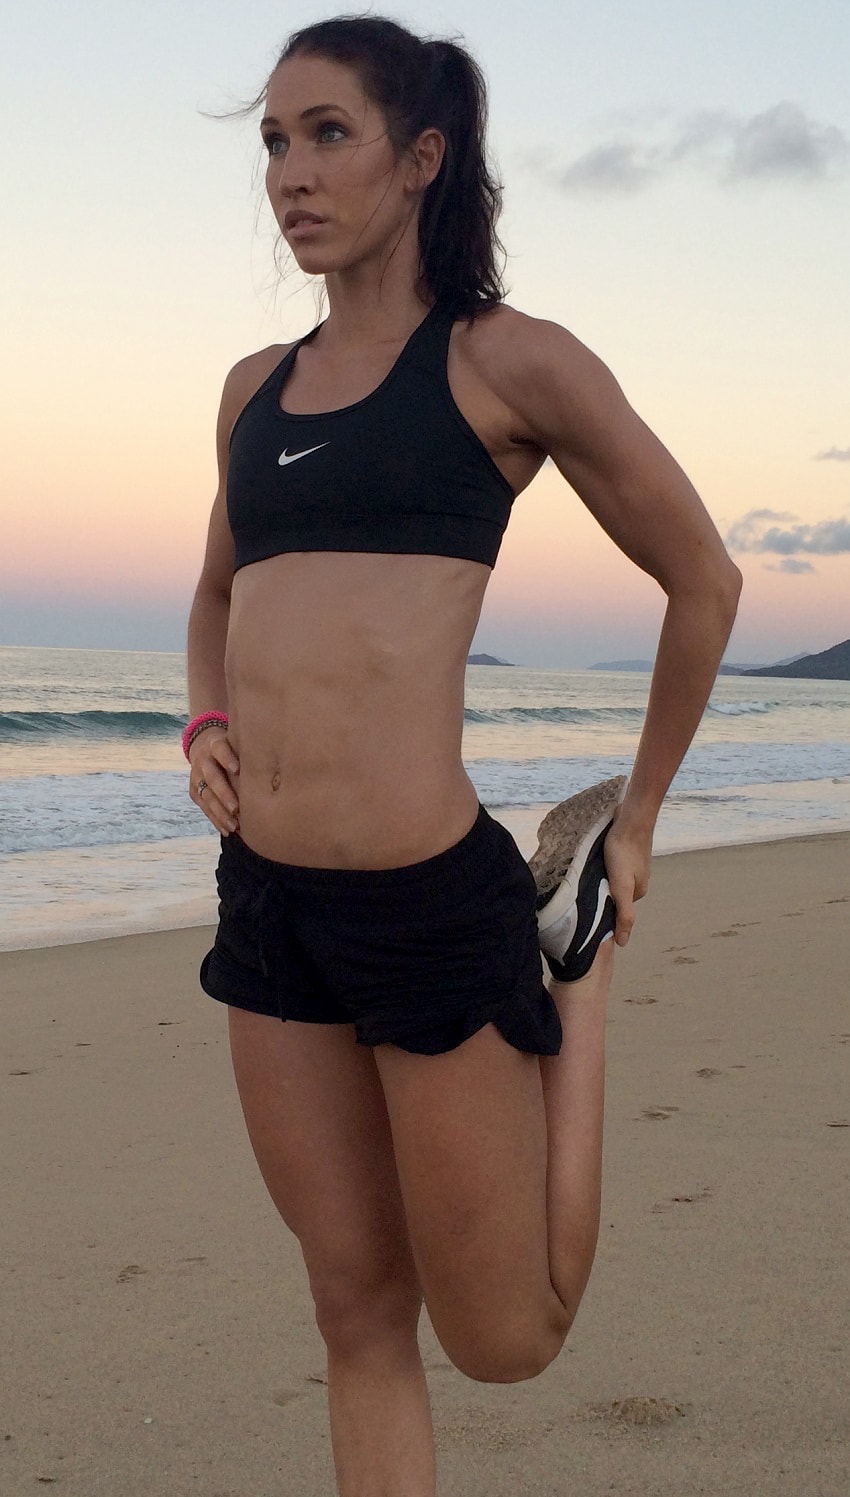 Cass Olholm stretching on the beach in her sports suit